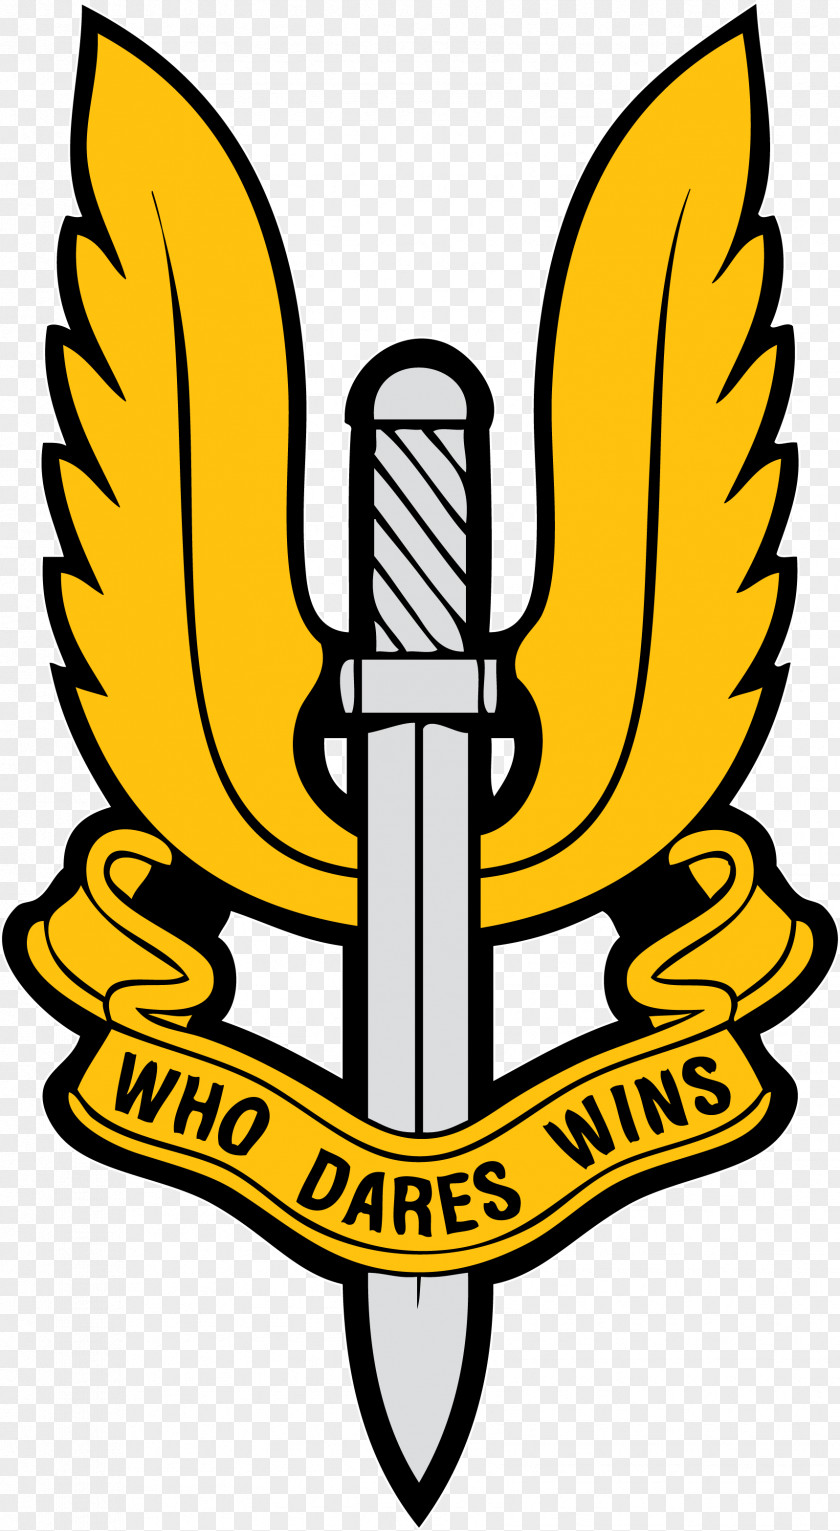 United Kingdom Special Air Service Forces Who Dares Wins Regiment PNG